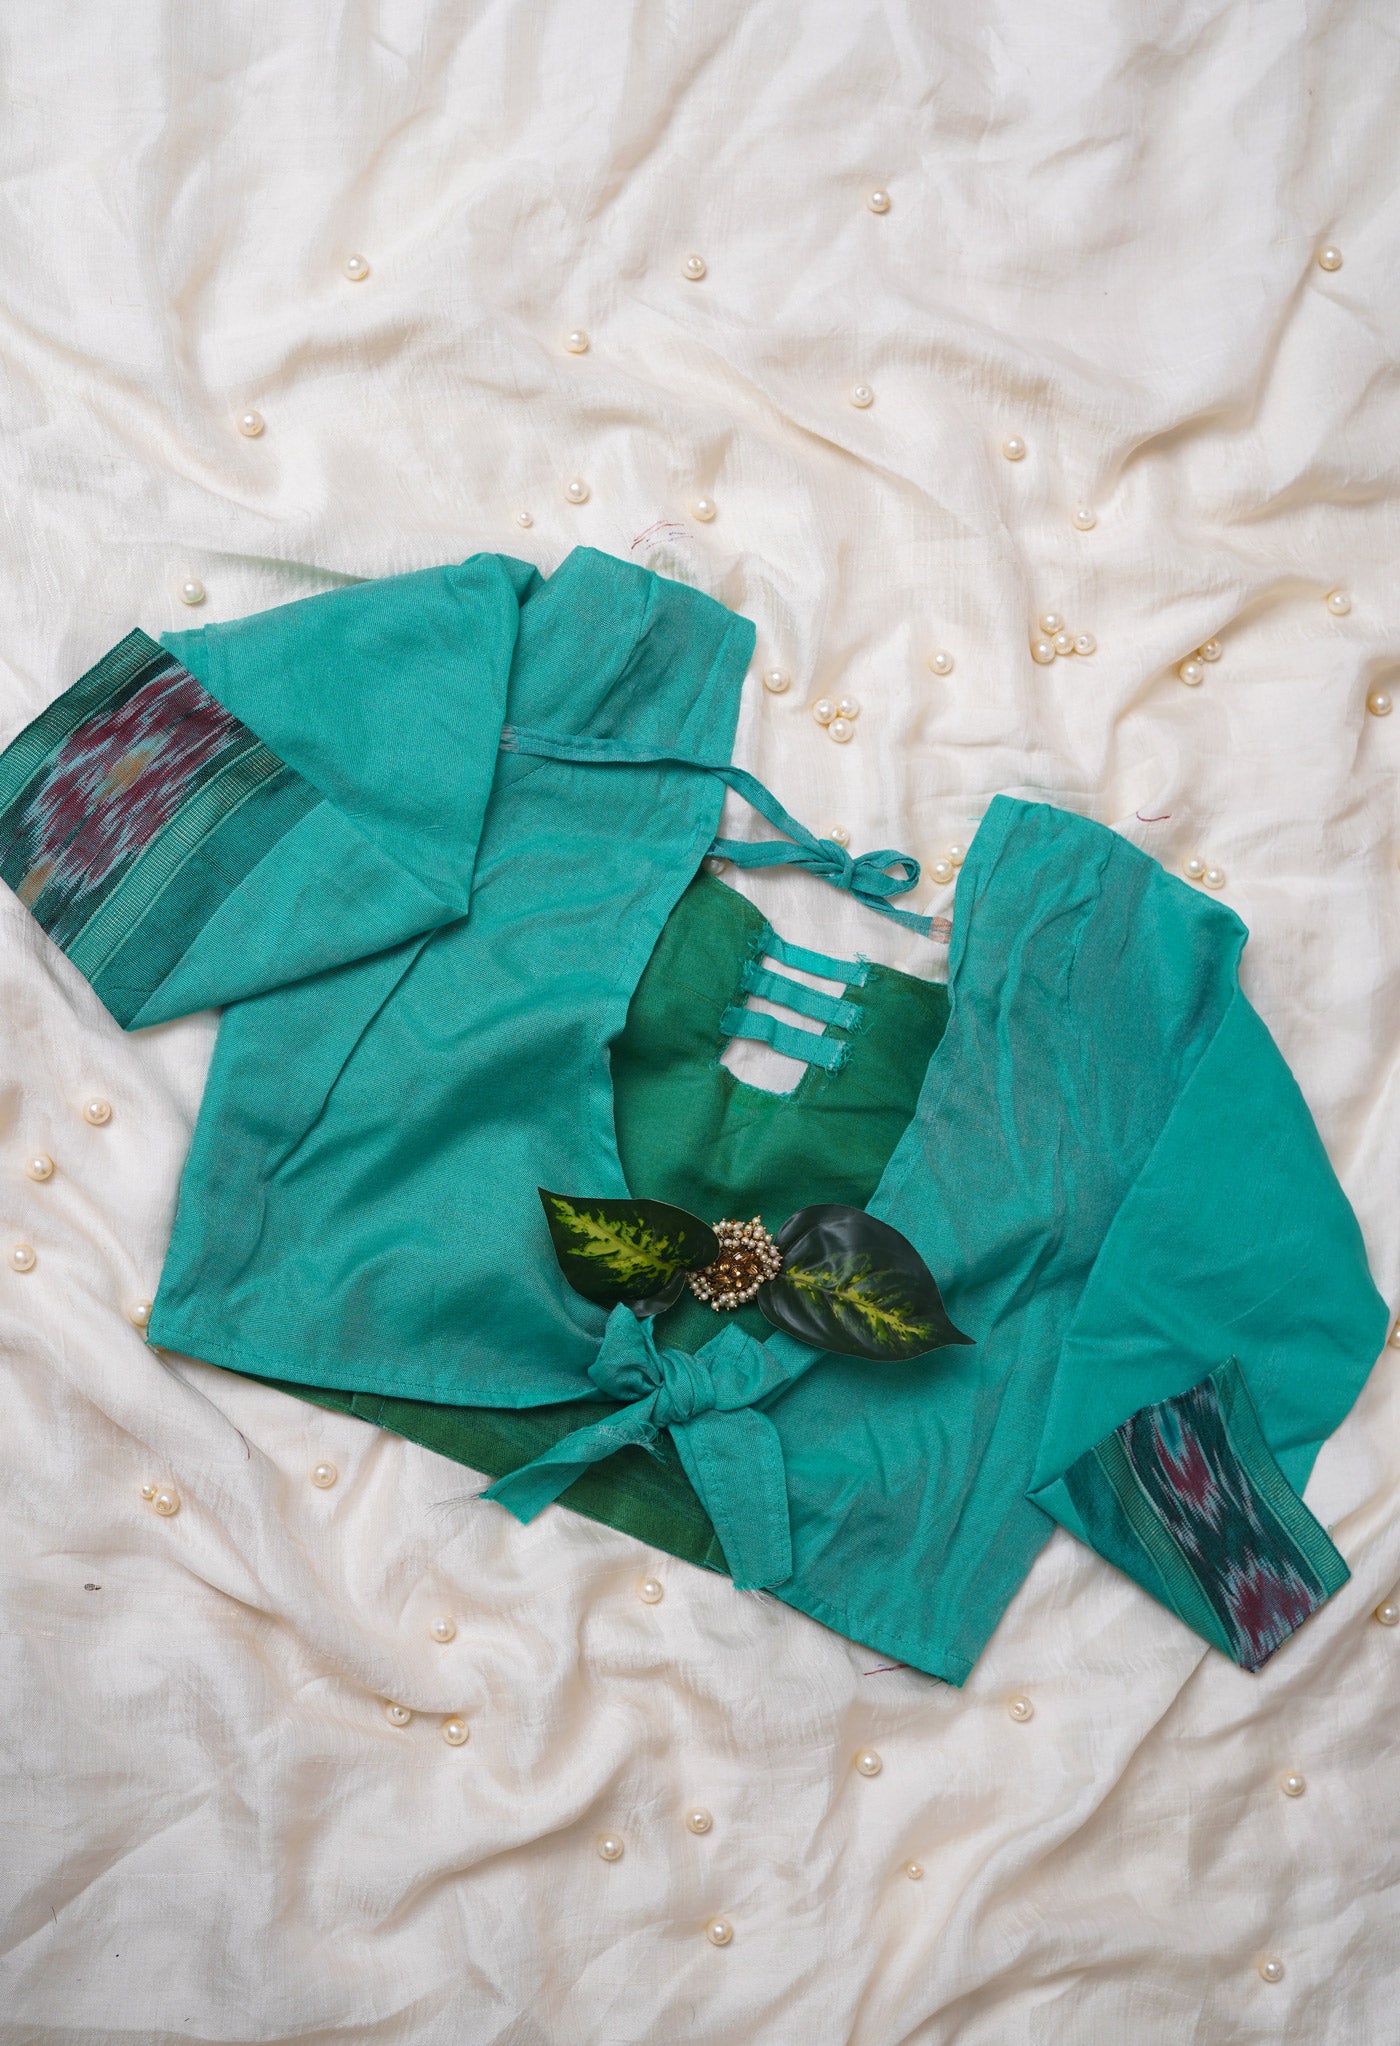 Teal Green Pure Bengal Ghicha Tussar Jute Readymade Blouse (32 Size +1inch Margin)–PKB420